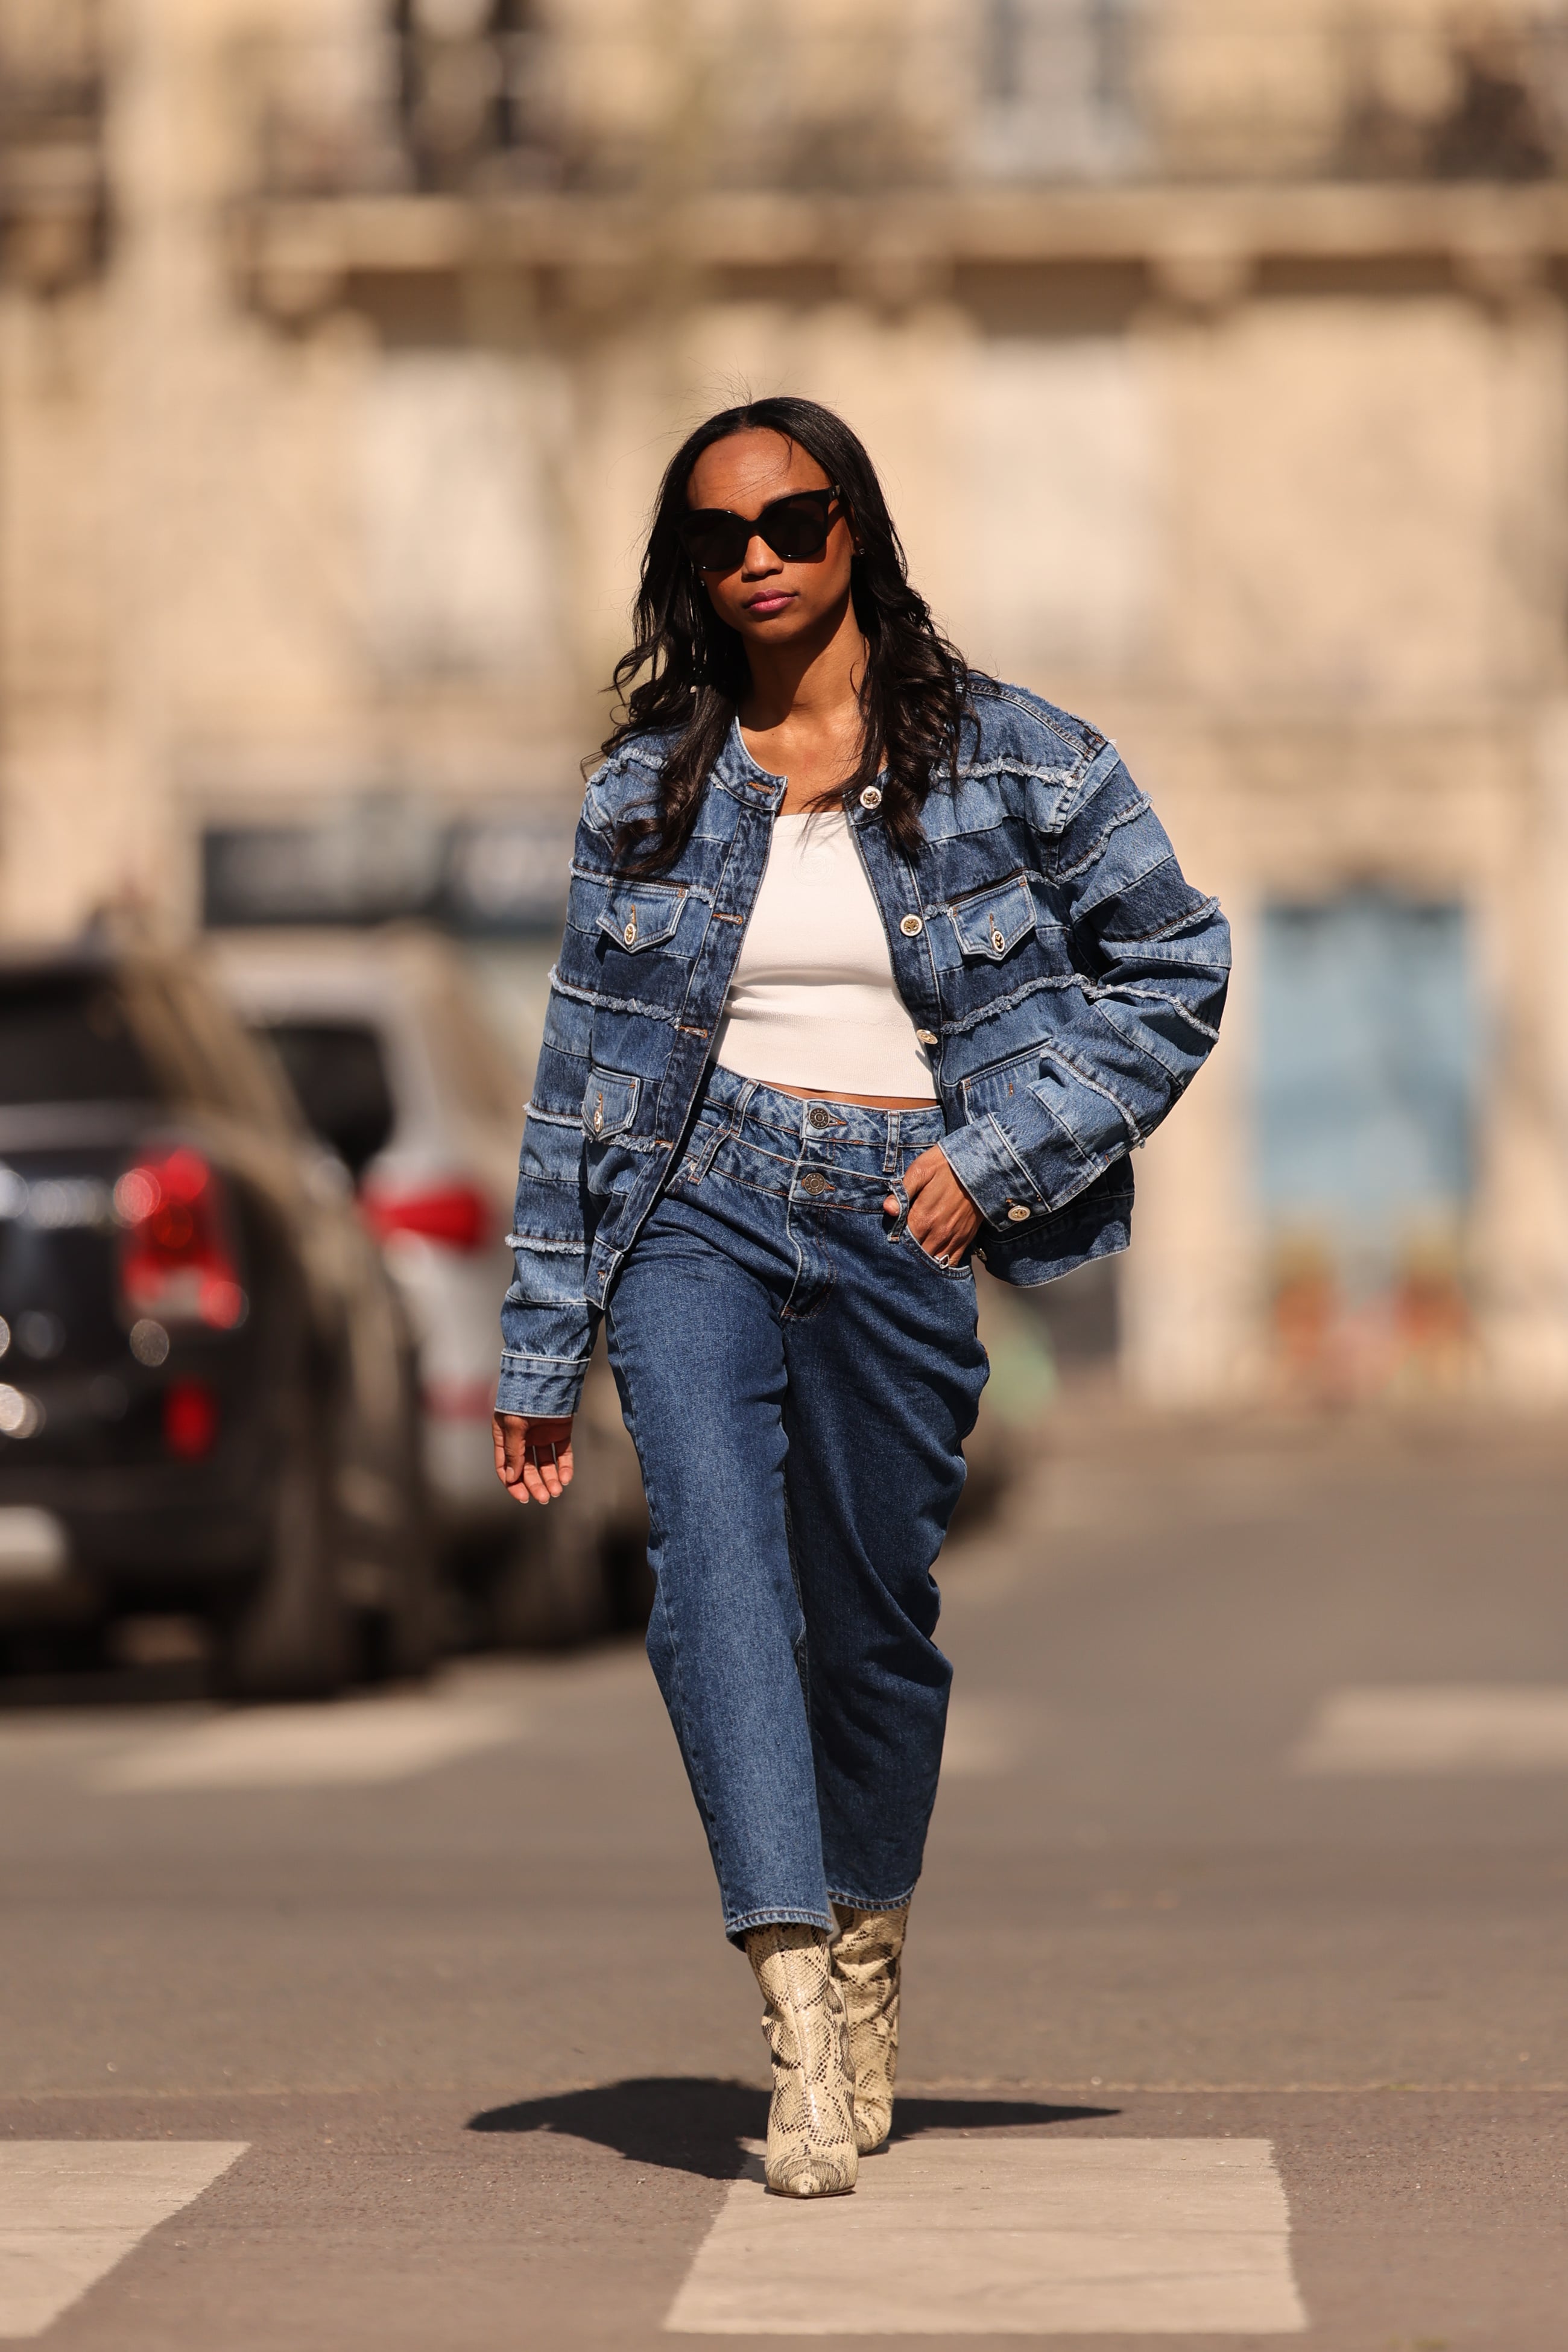 Look Of The Week - How To Wear Slouchy Jeans